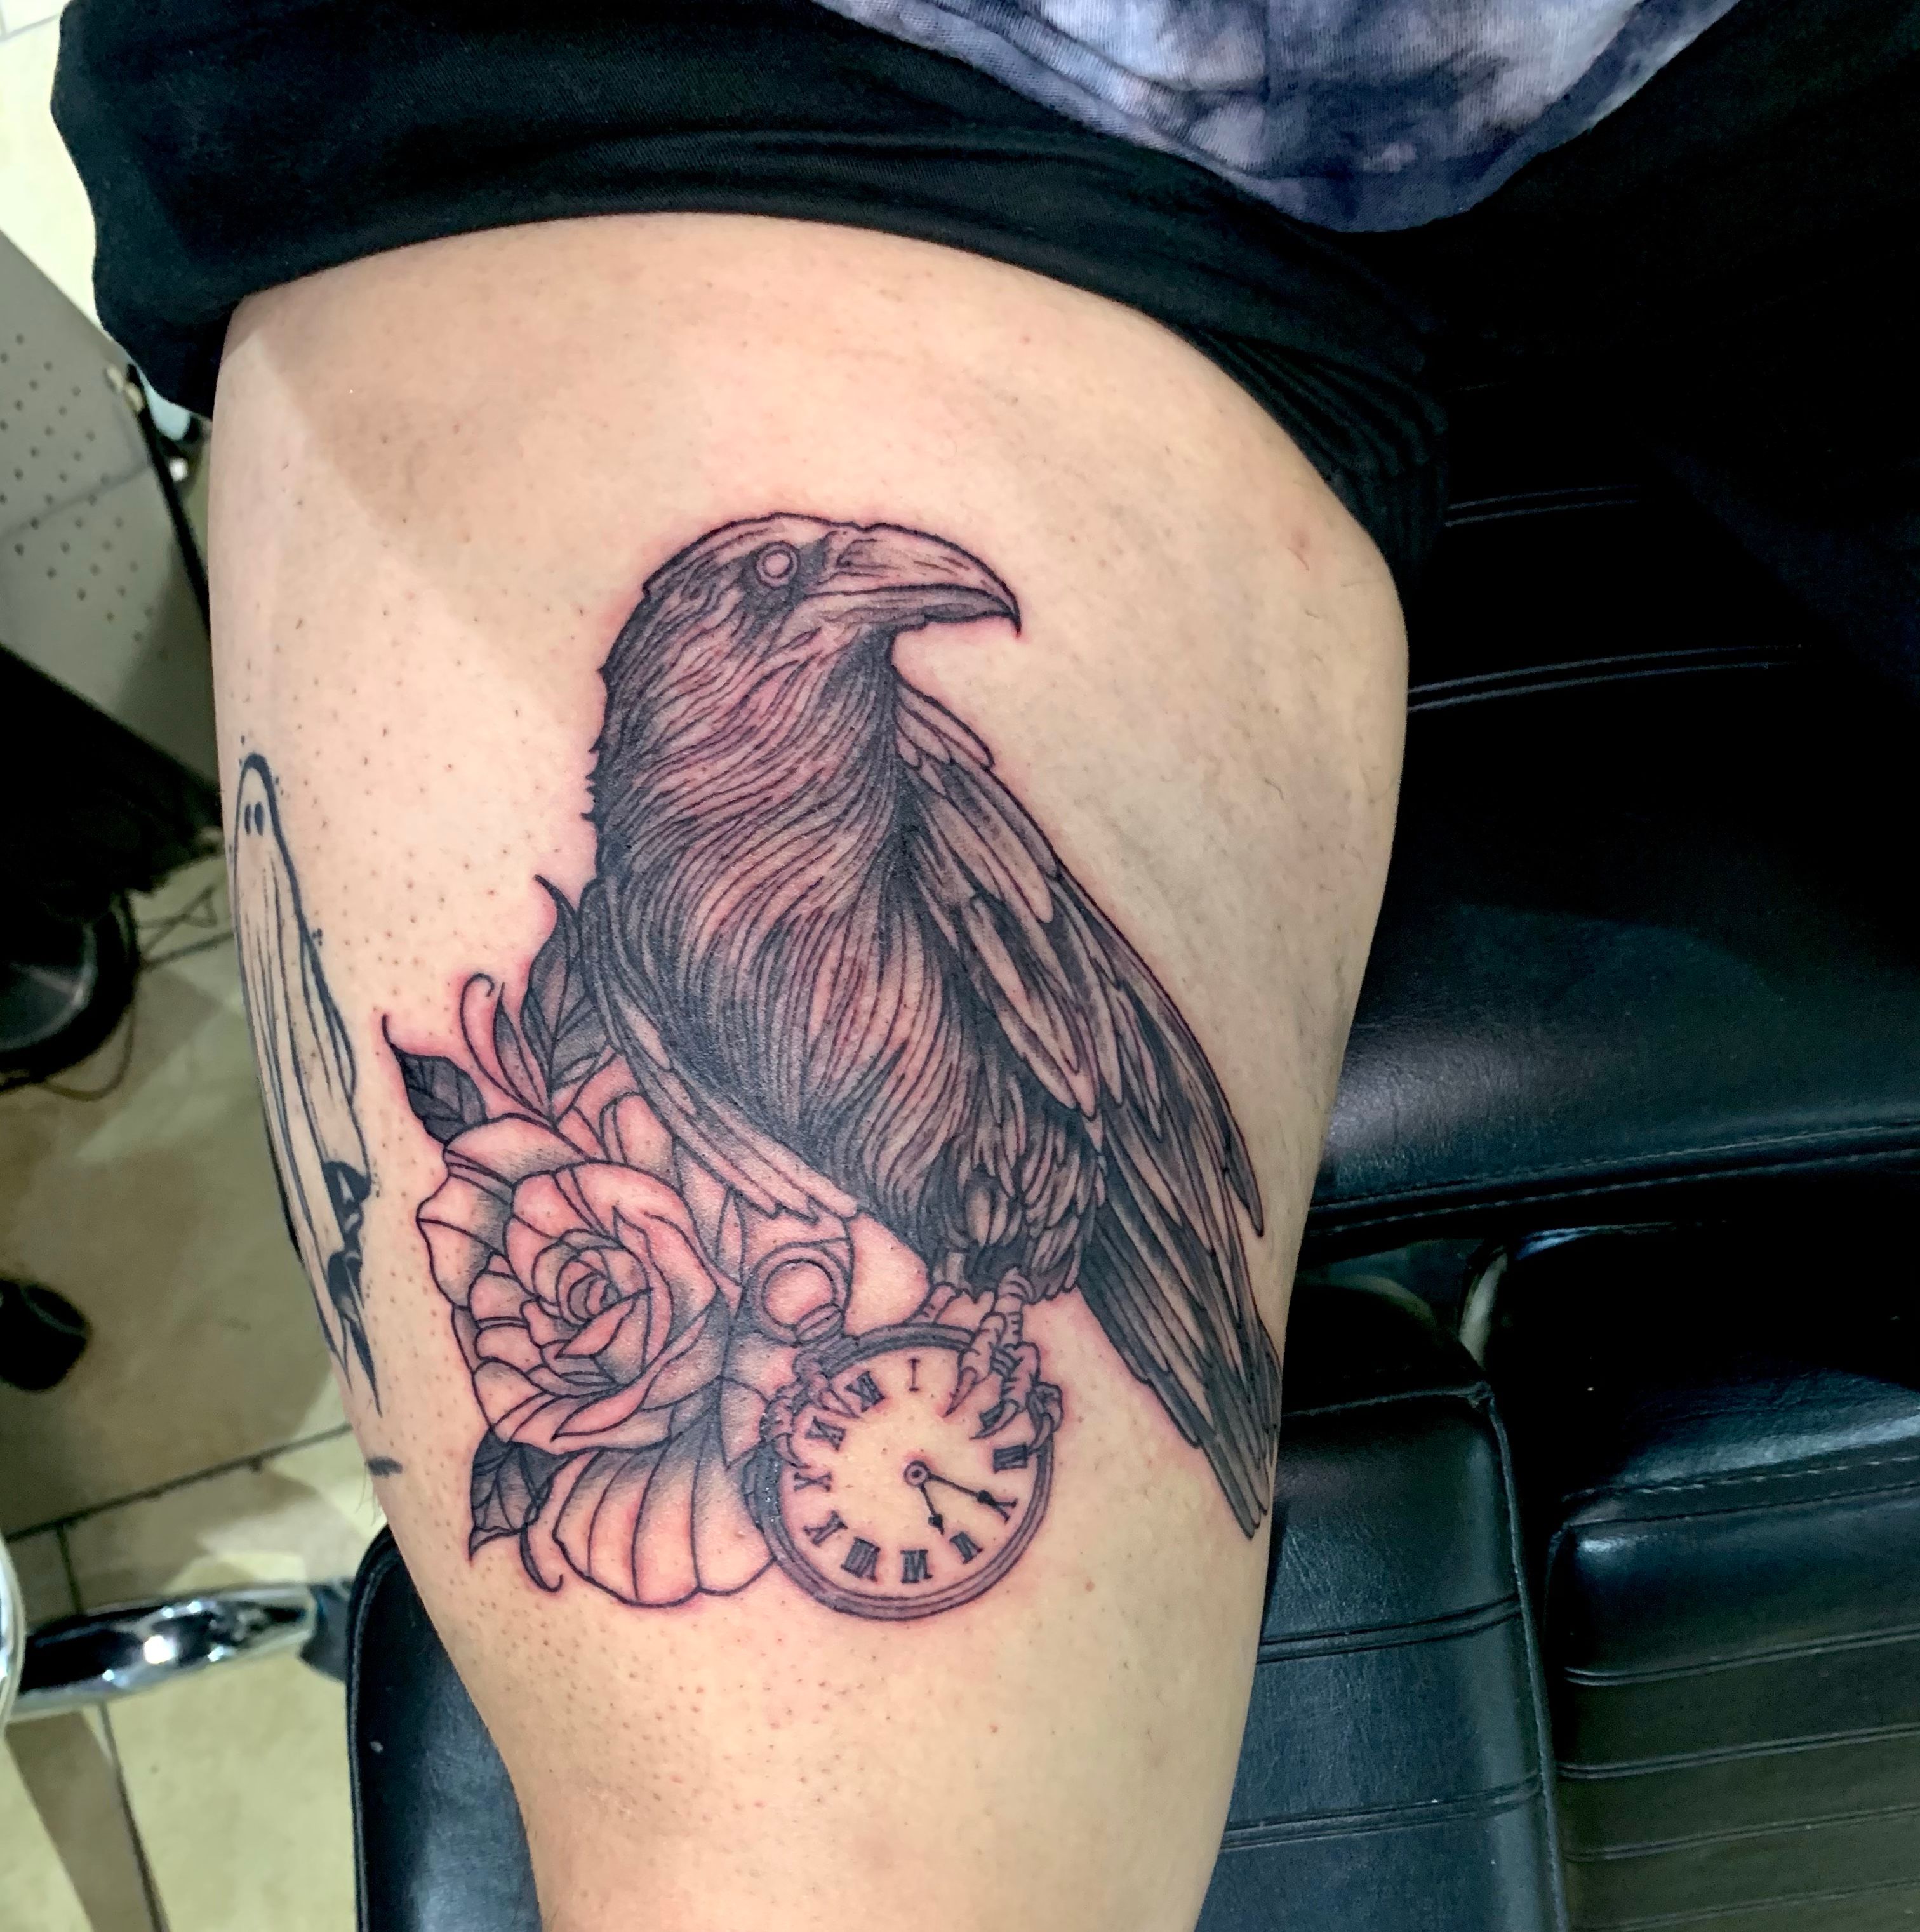 10 Best Edgar Allan Poe Tattoo Ideas Youll Have To See To Believe   Outsons  Mens Fashion Tips And Style Guides  Poe tattoo Tattoos Edgar  allan poe